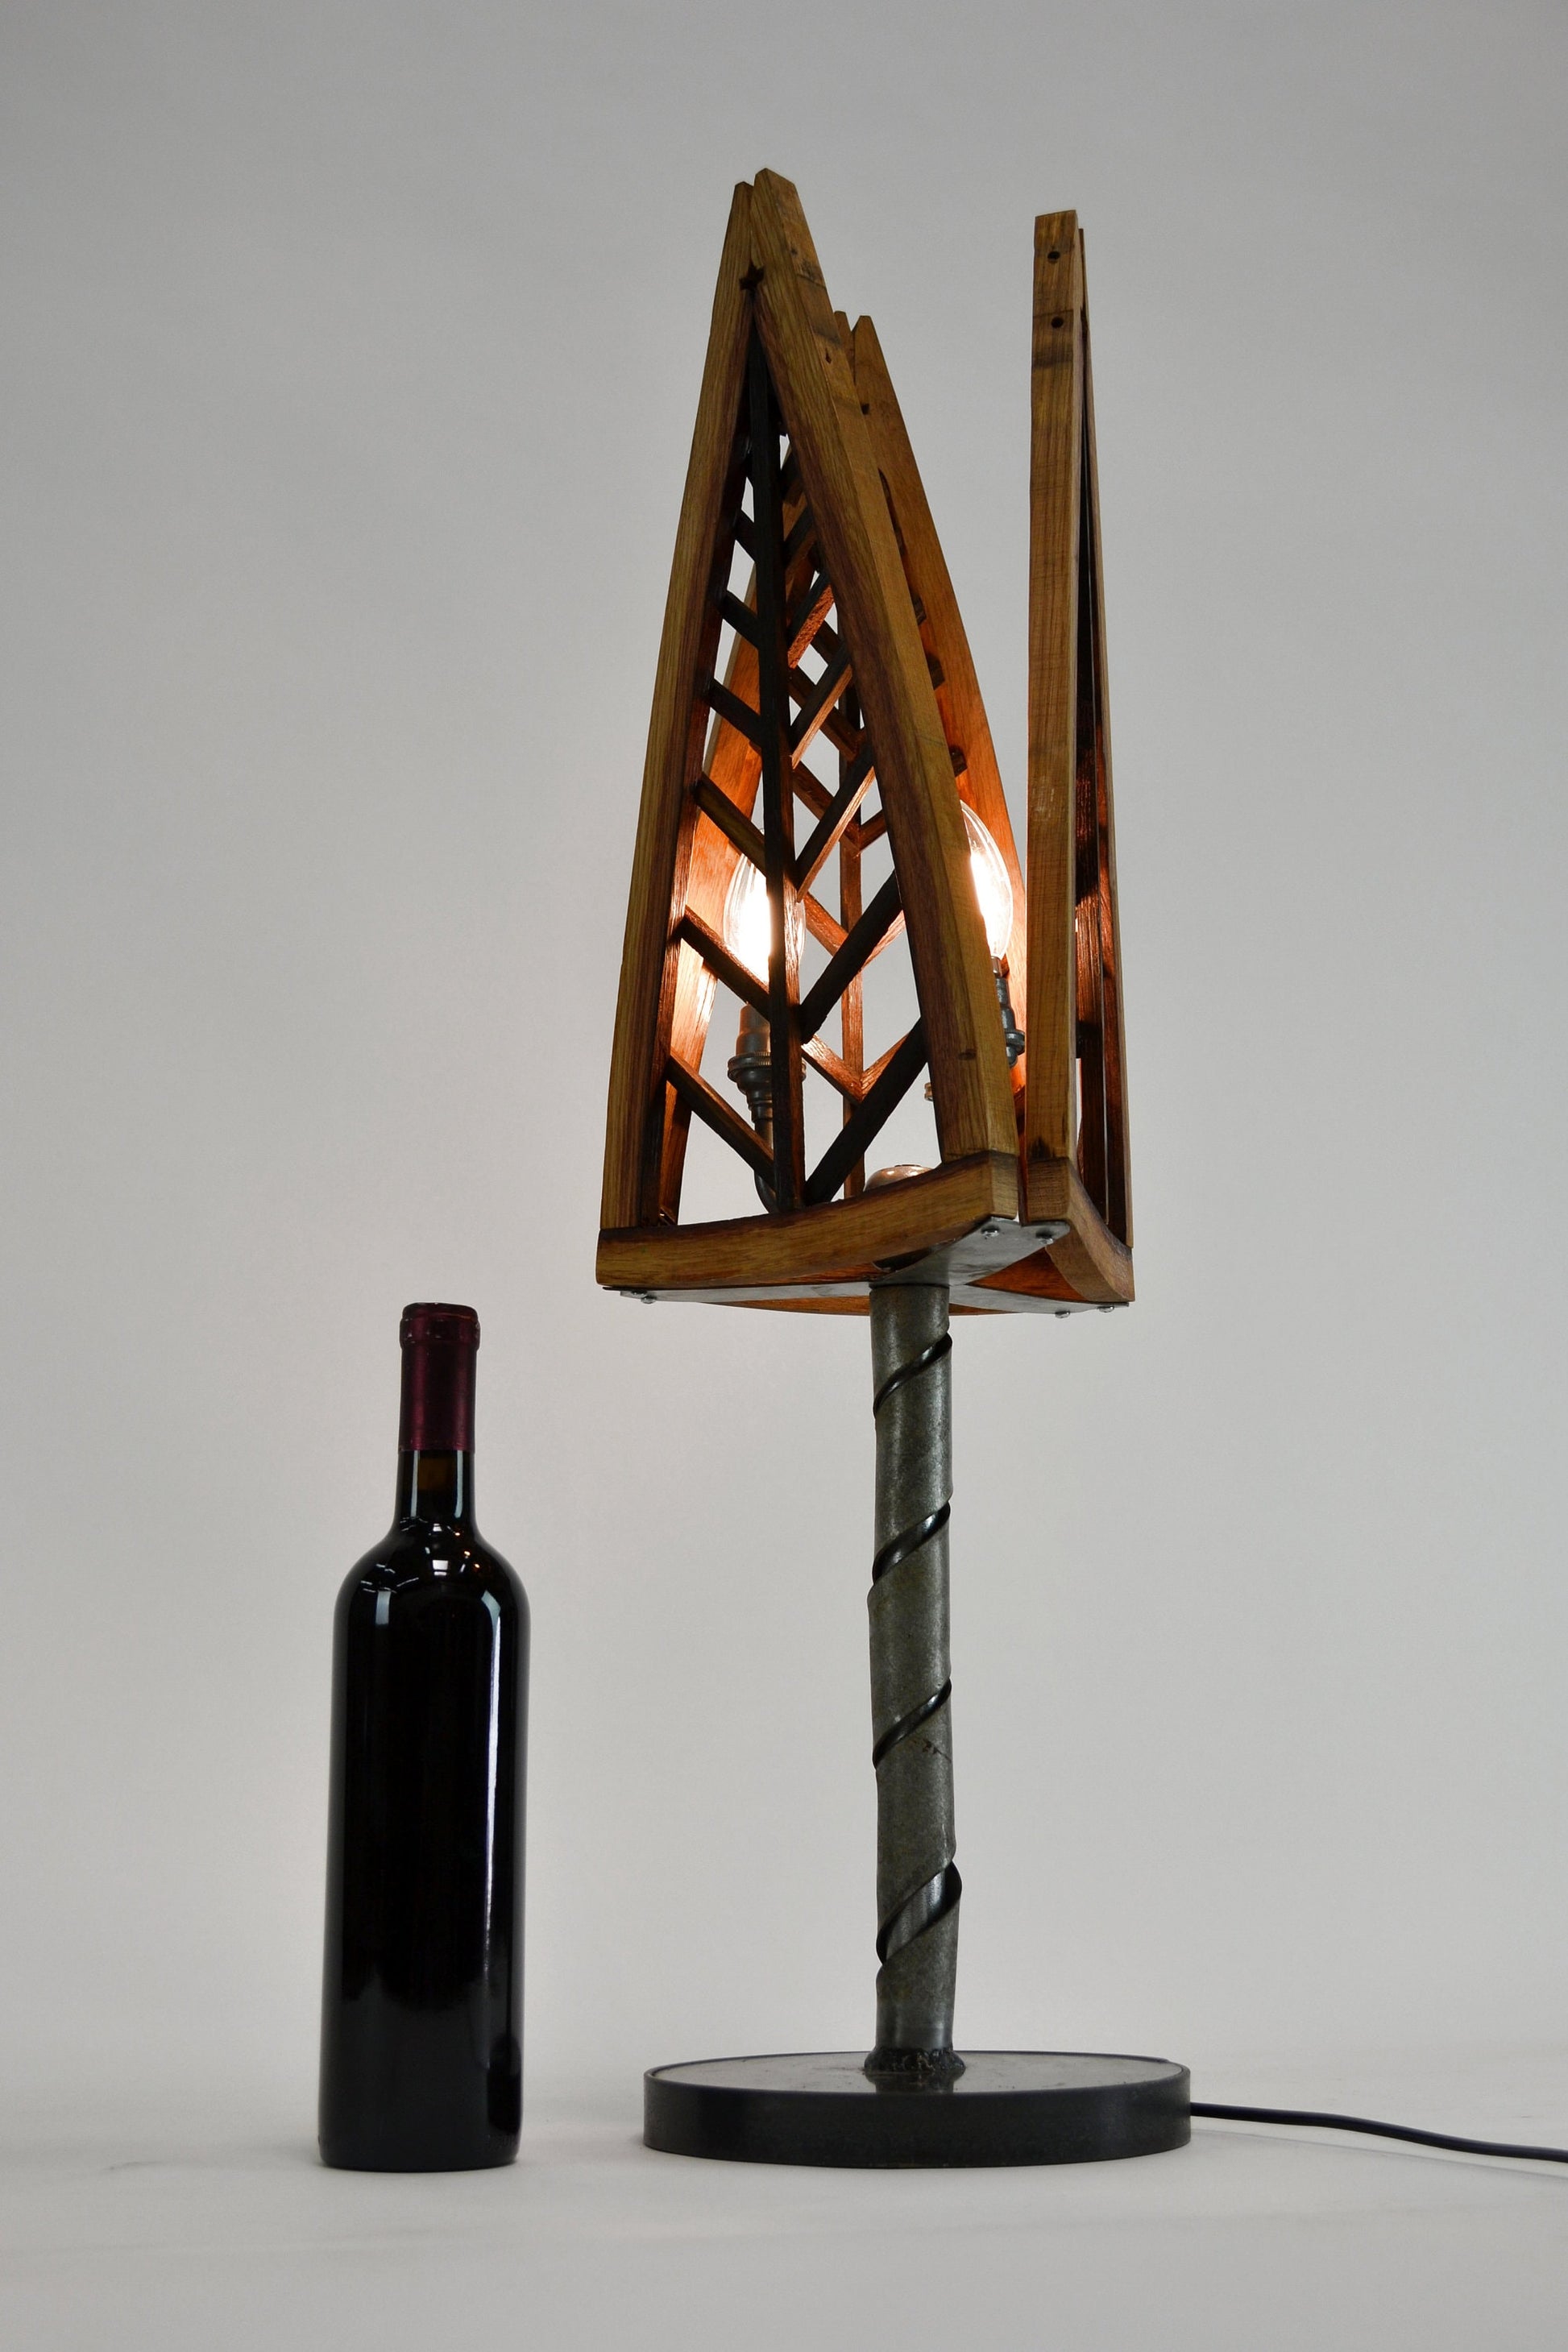 Wine Barrel Table Lamp - Folha - Made from retired wine barrel rings and staves 100% Recycled!